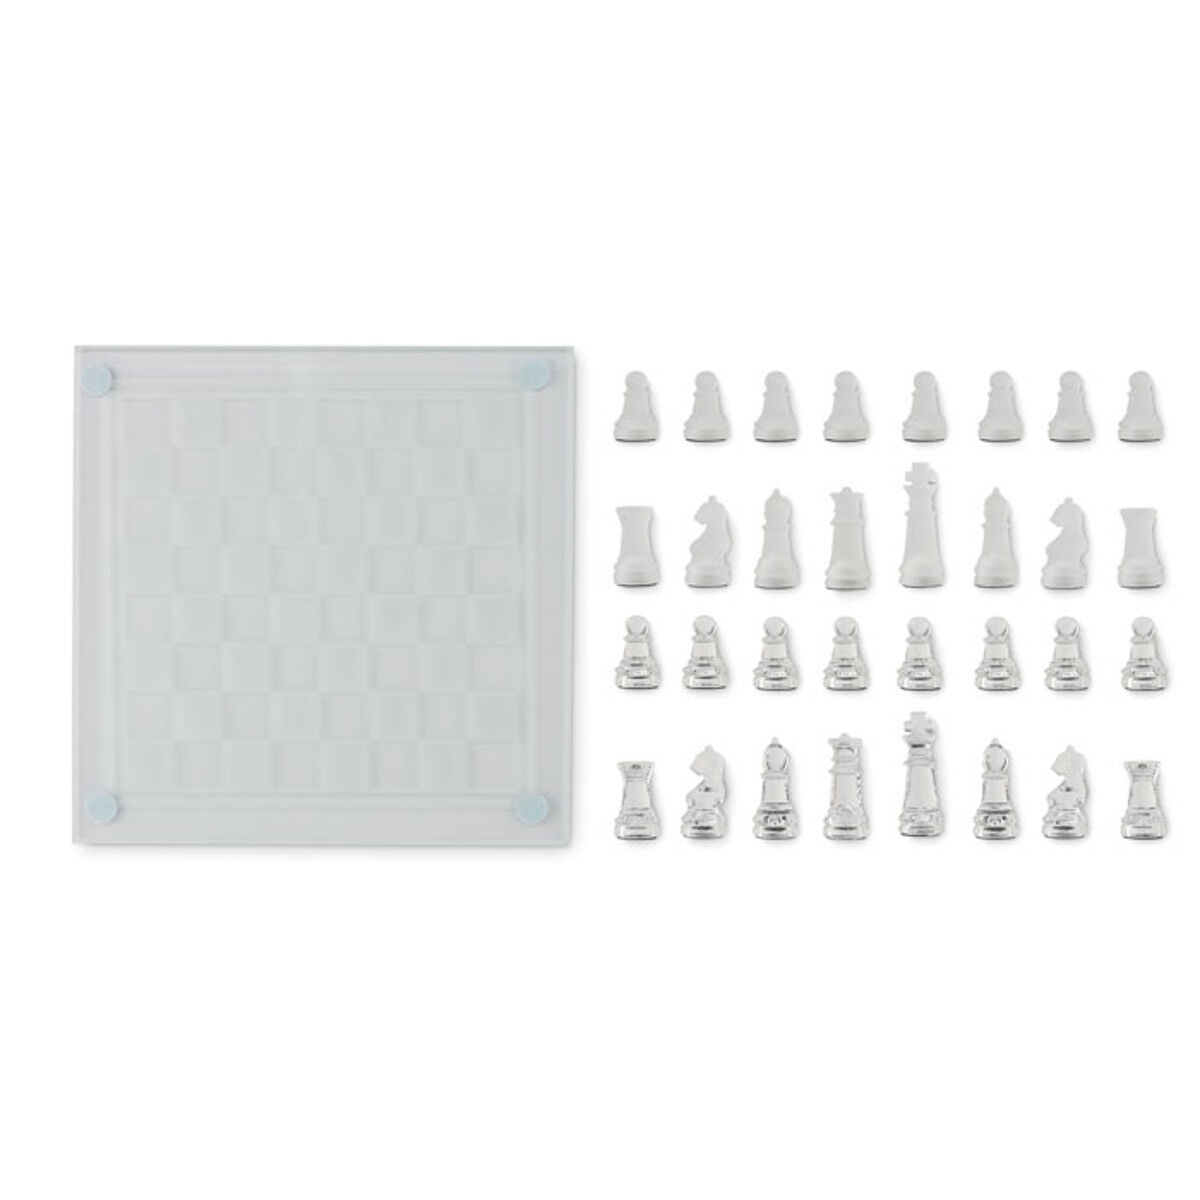 Glass Chess Board Set (top down view)